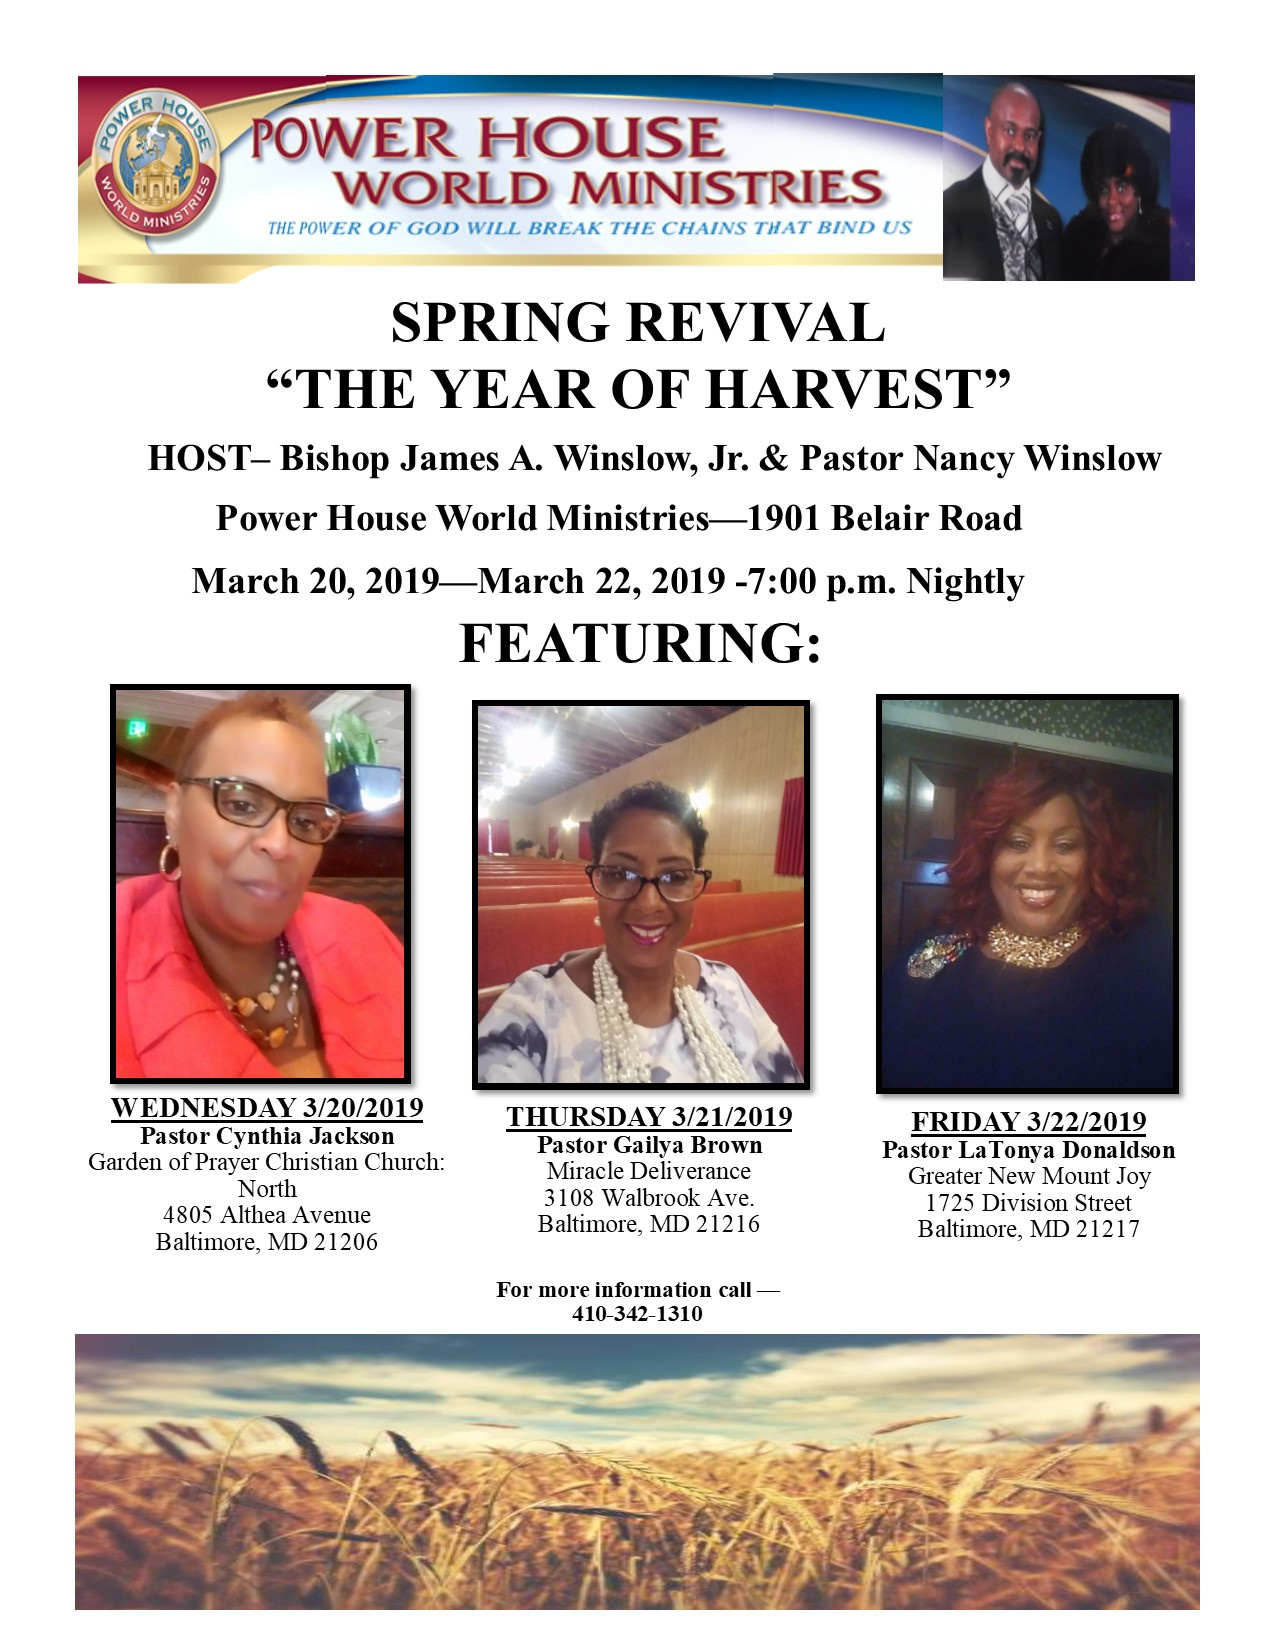 Power House World Ministries - Spring Revival